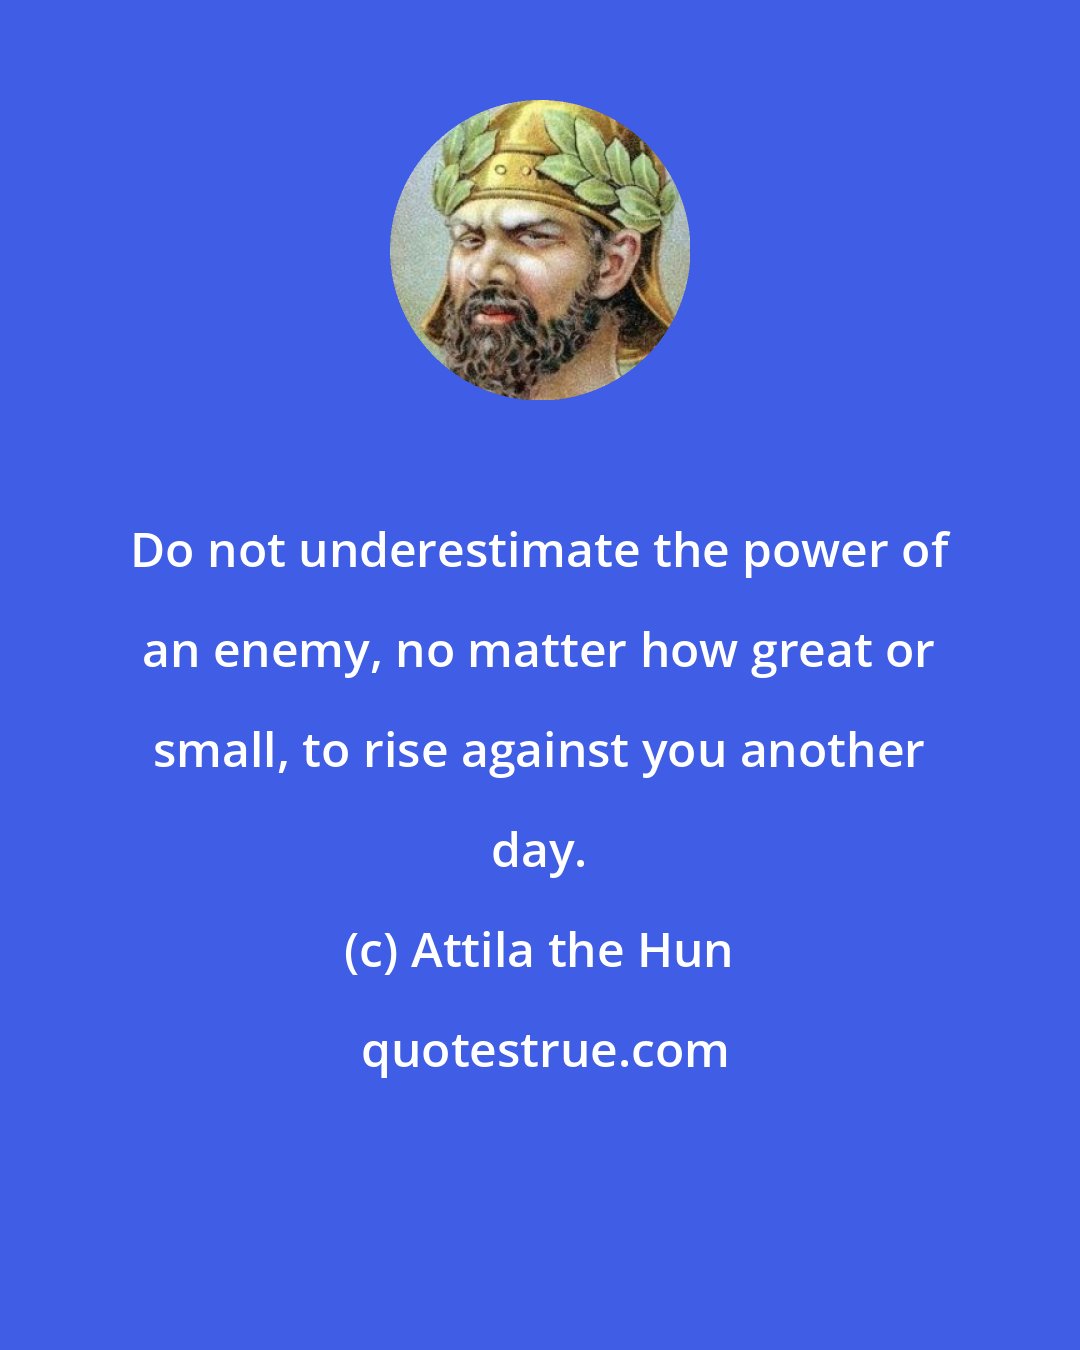 Attila the Hun: Do not underestimate the power of an enemy, no matter how great or small, to rise against you another day.